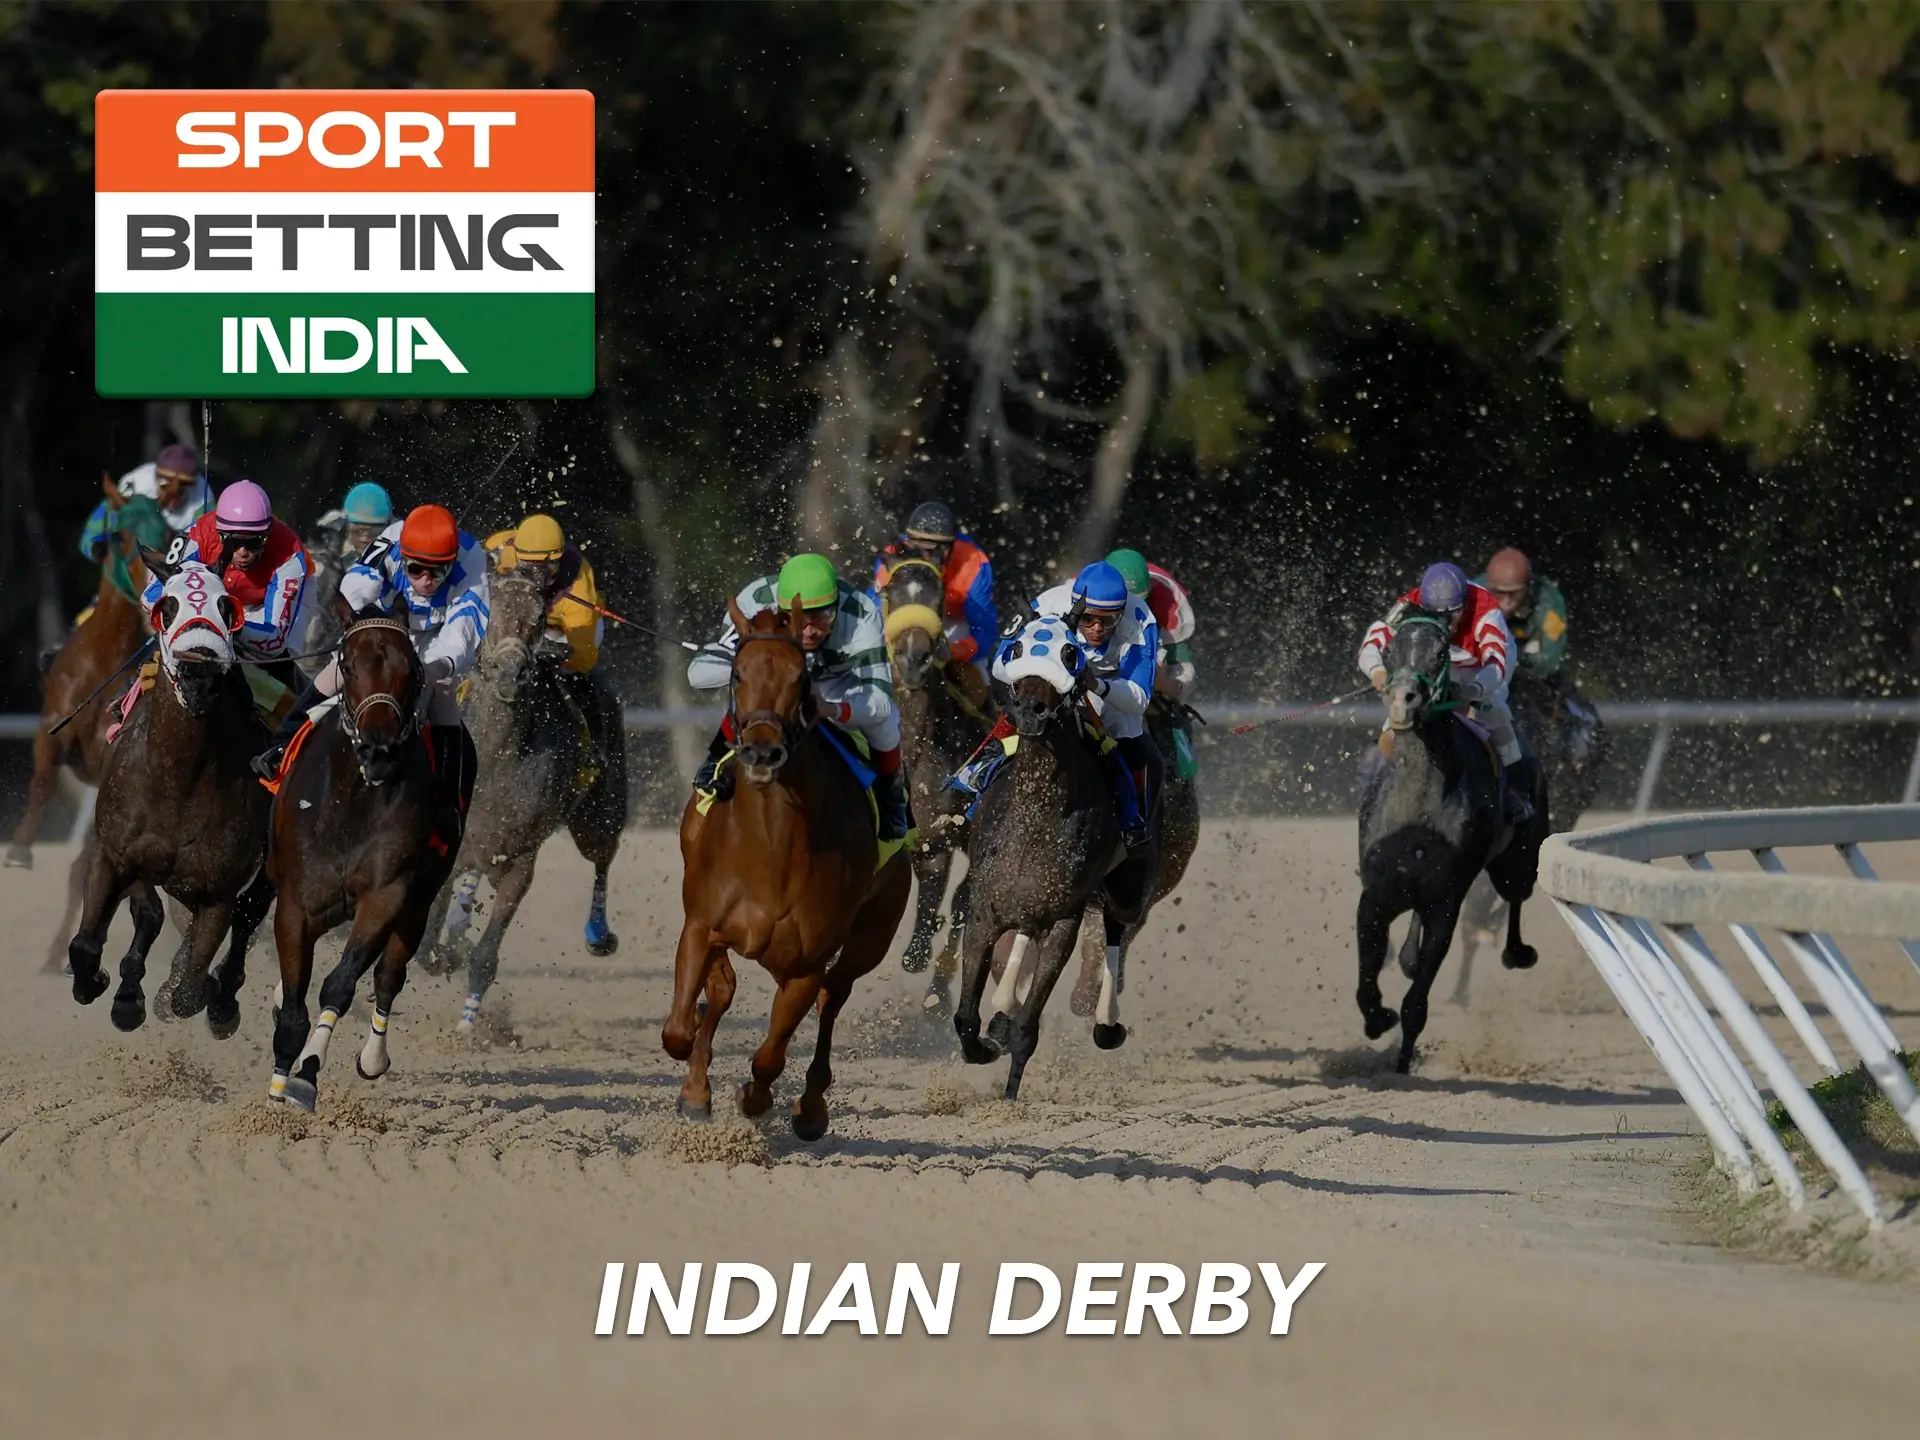 Use your opportunity to make a quality prediction on one of the popular horse racing tournaments in India.